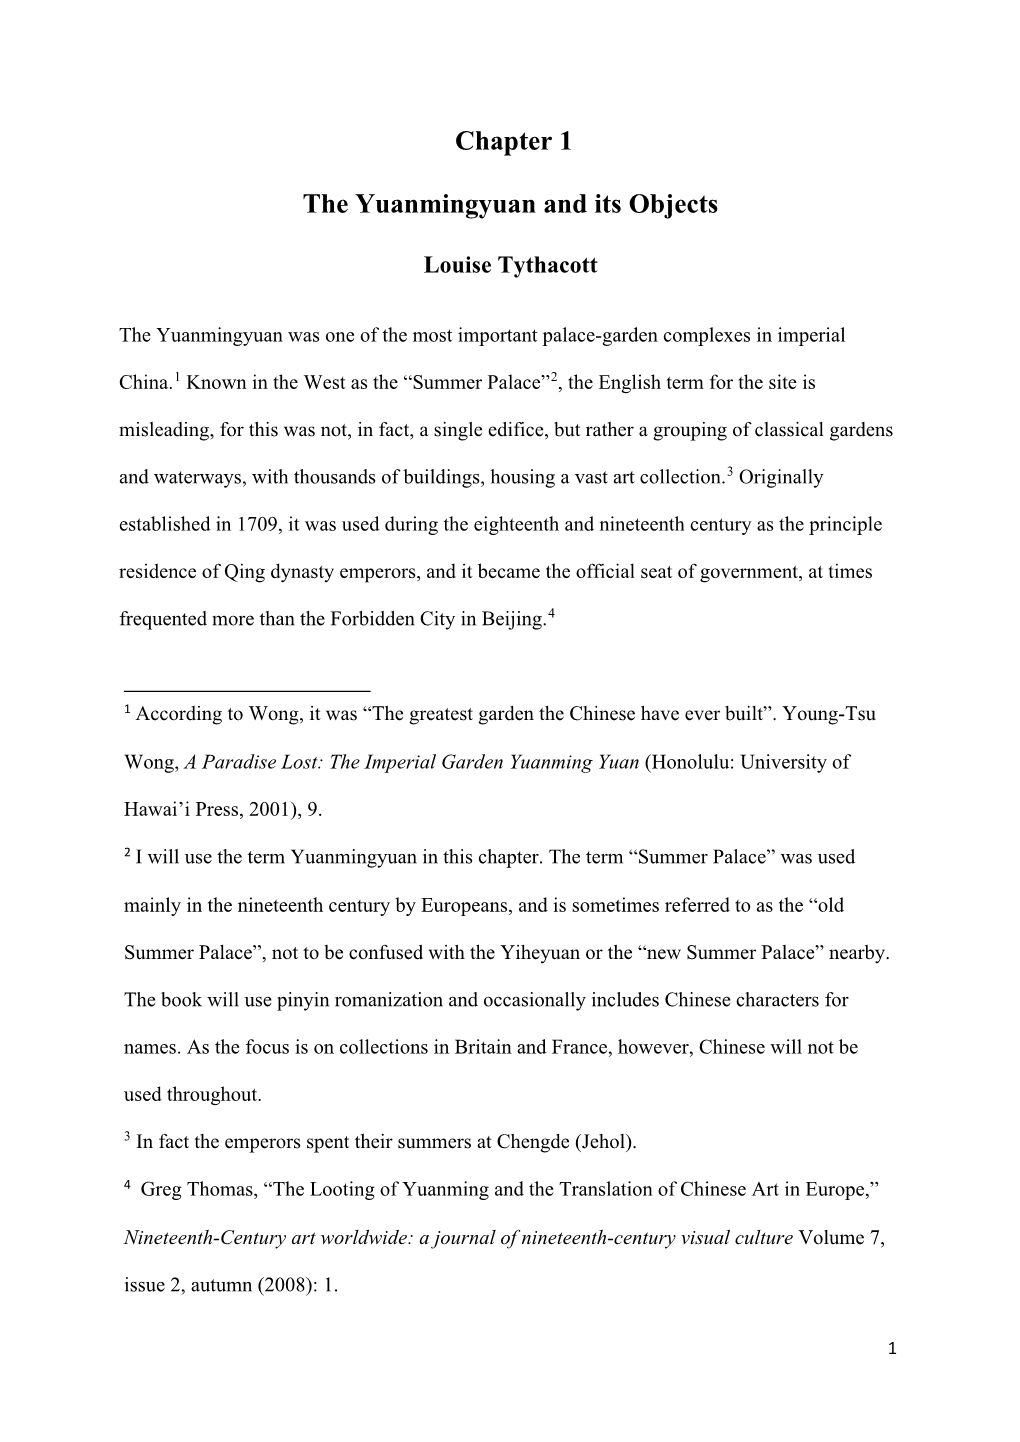 Chapter 1 the Yuanmingyuan and Its Objects